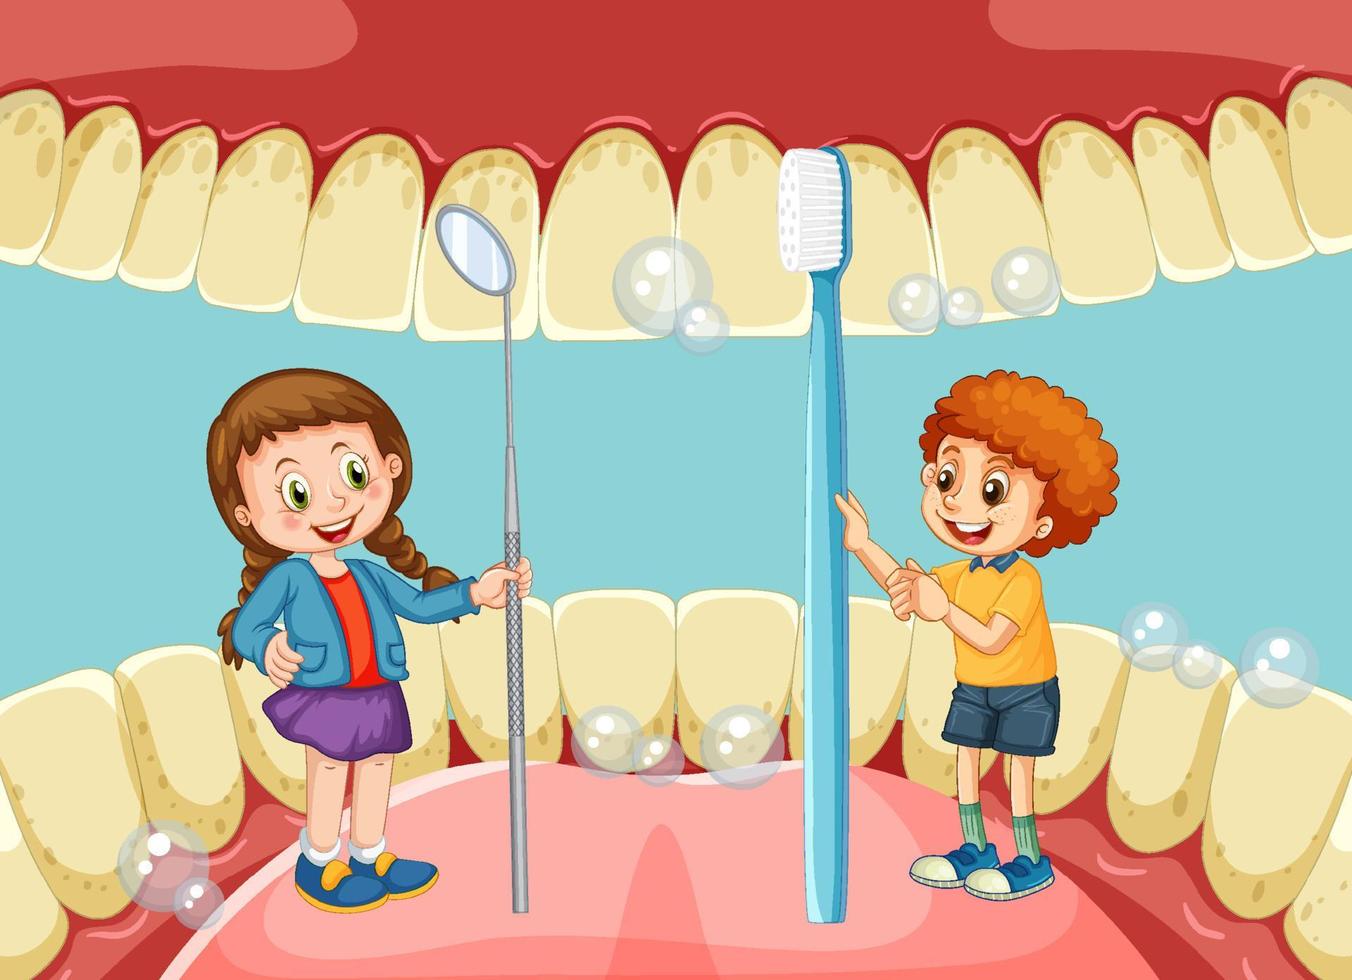 Happy kids holding dental mirror and toothbrush inside human mouth vector